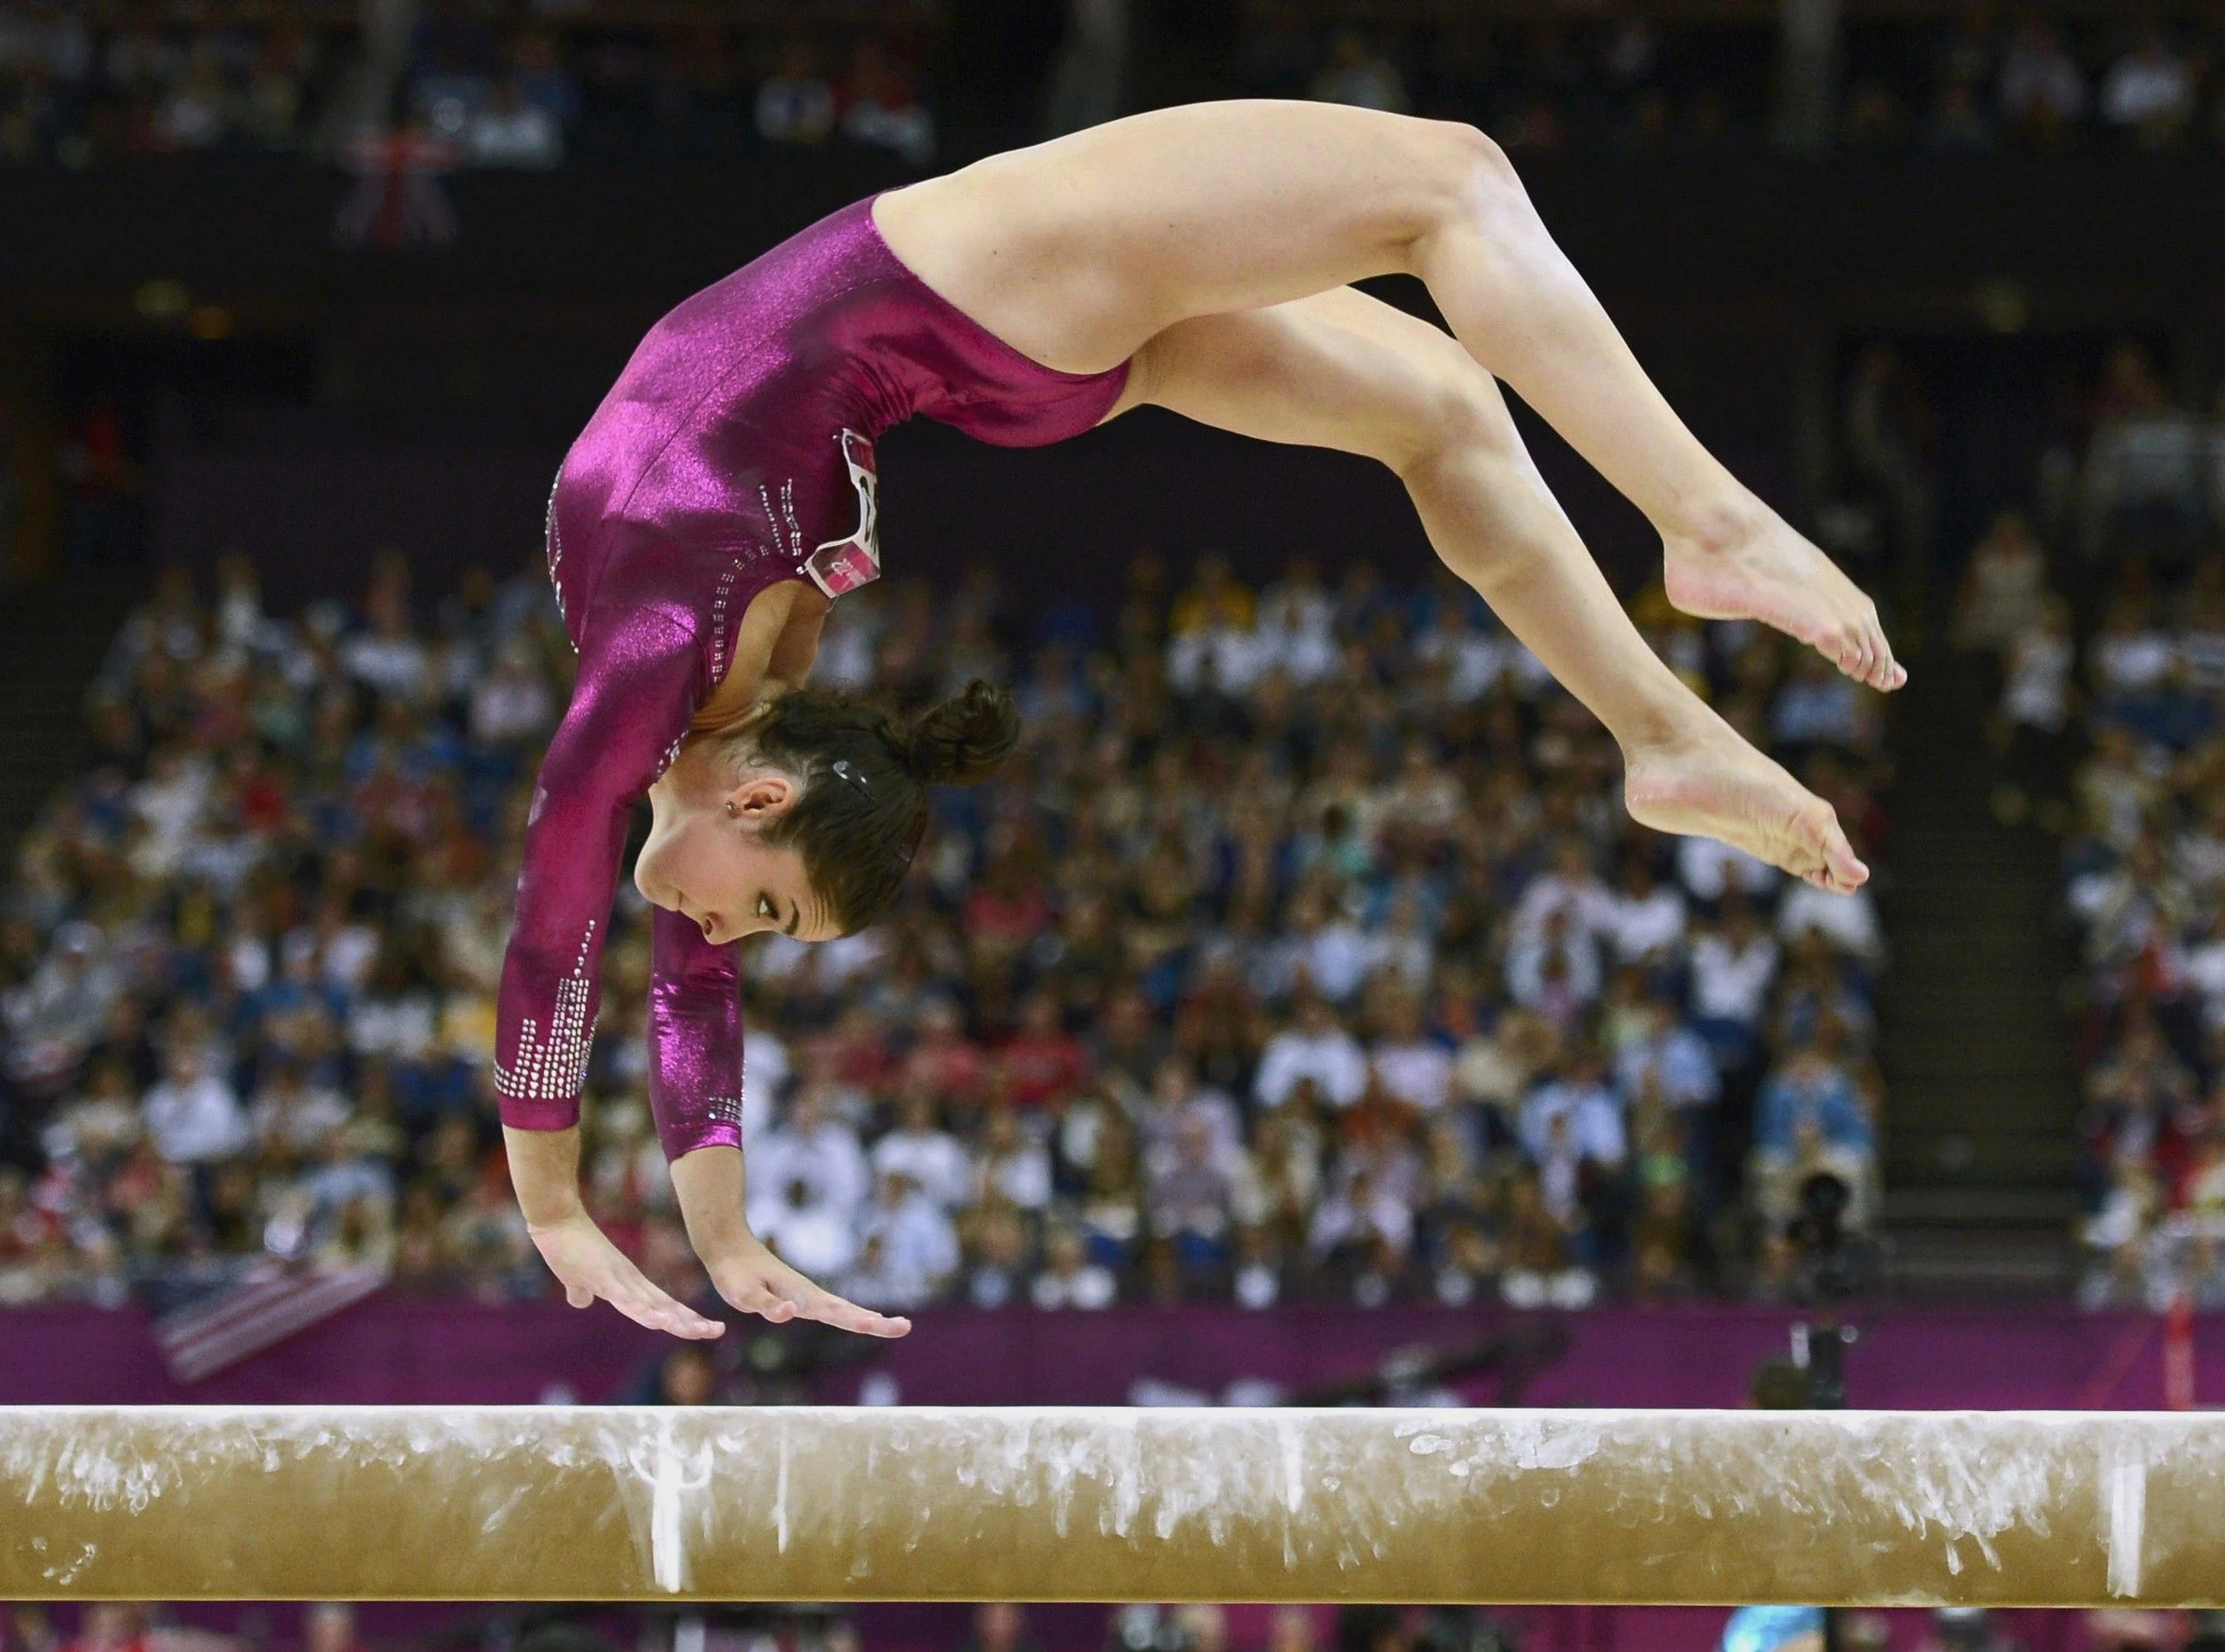 Acrobatic Gymnastics: A girl performing a back flip during a balance beam competitive event. 2560x1910 HD Wallpaper.